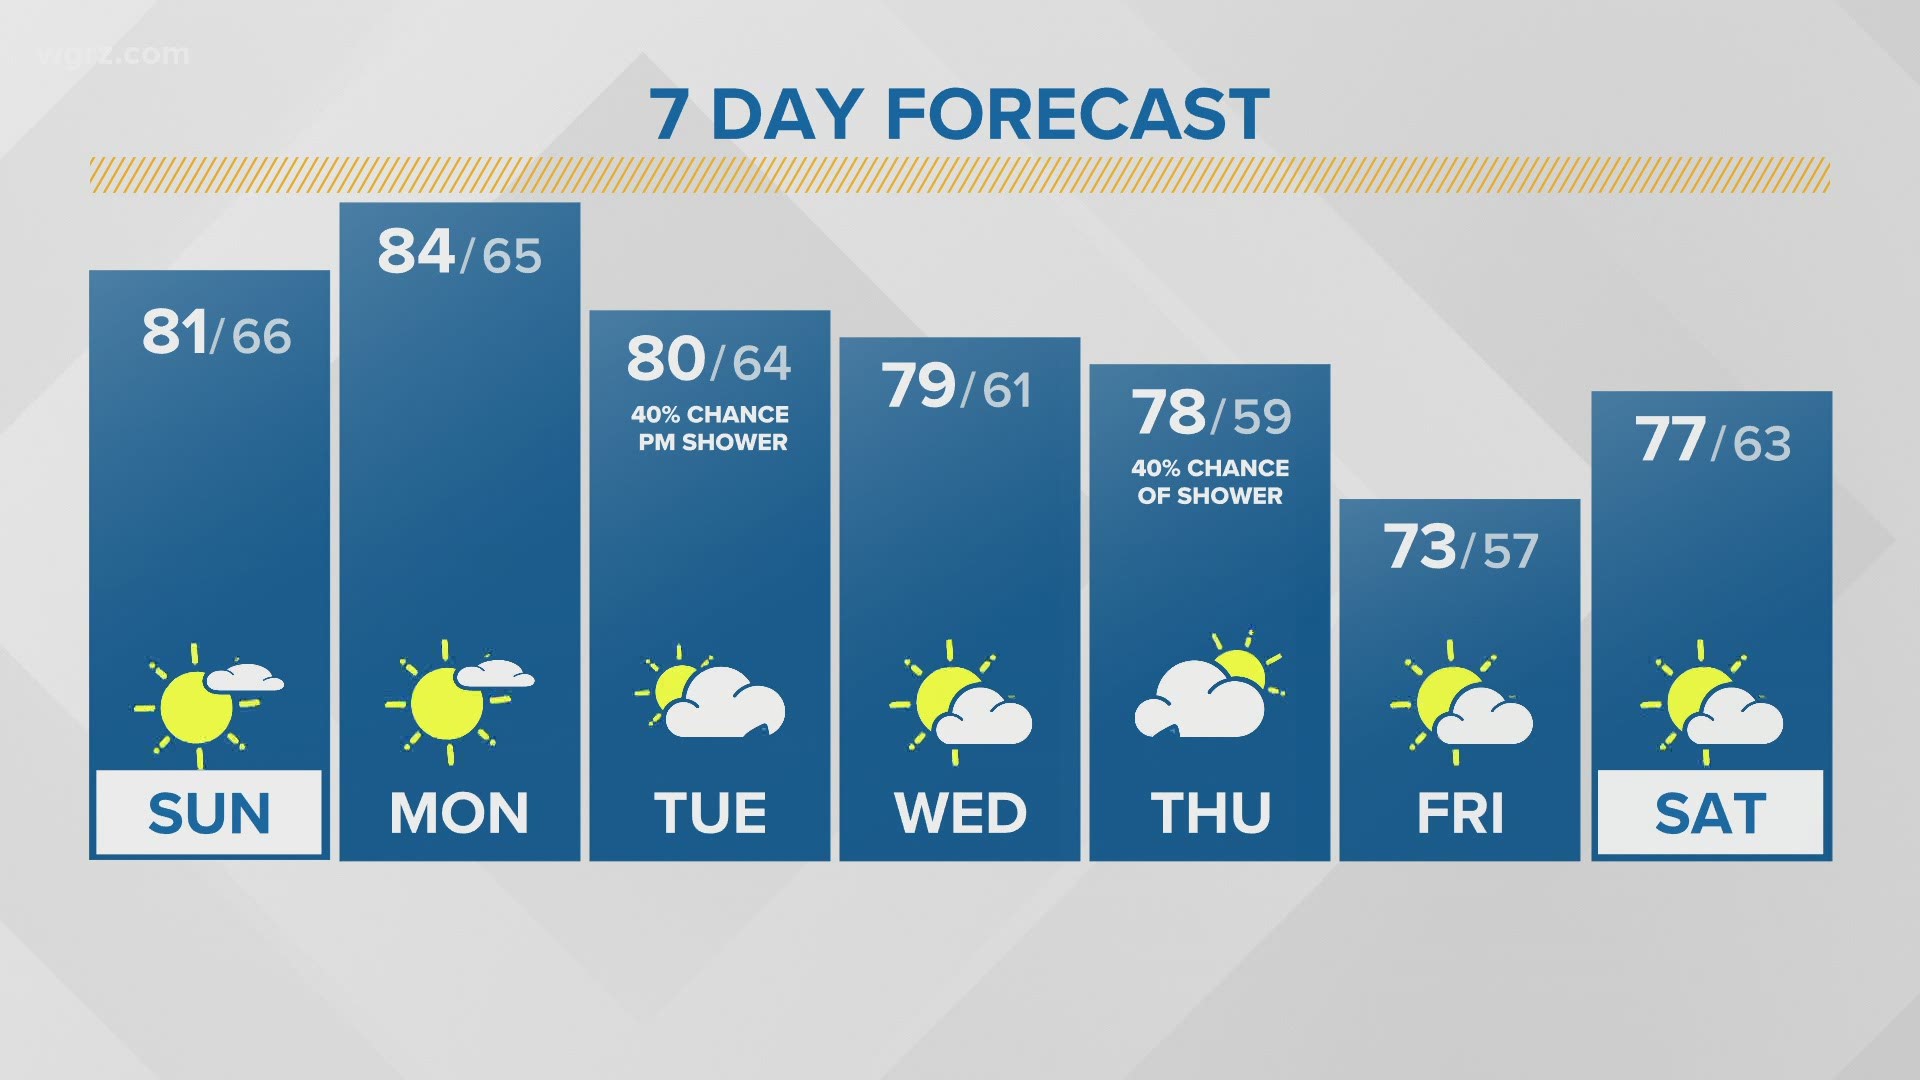 Storm Team 2 has your 7-day weather forecast